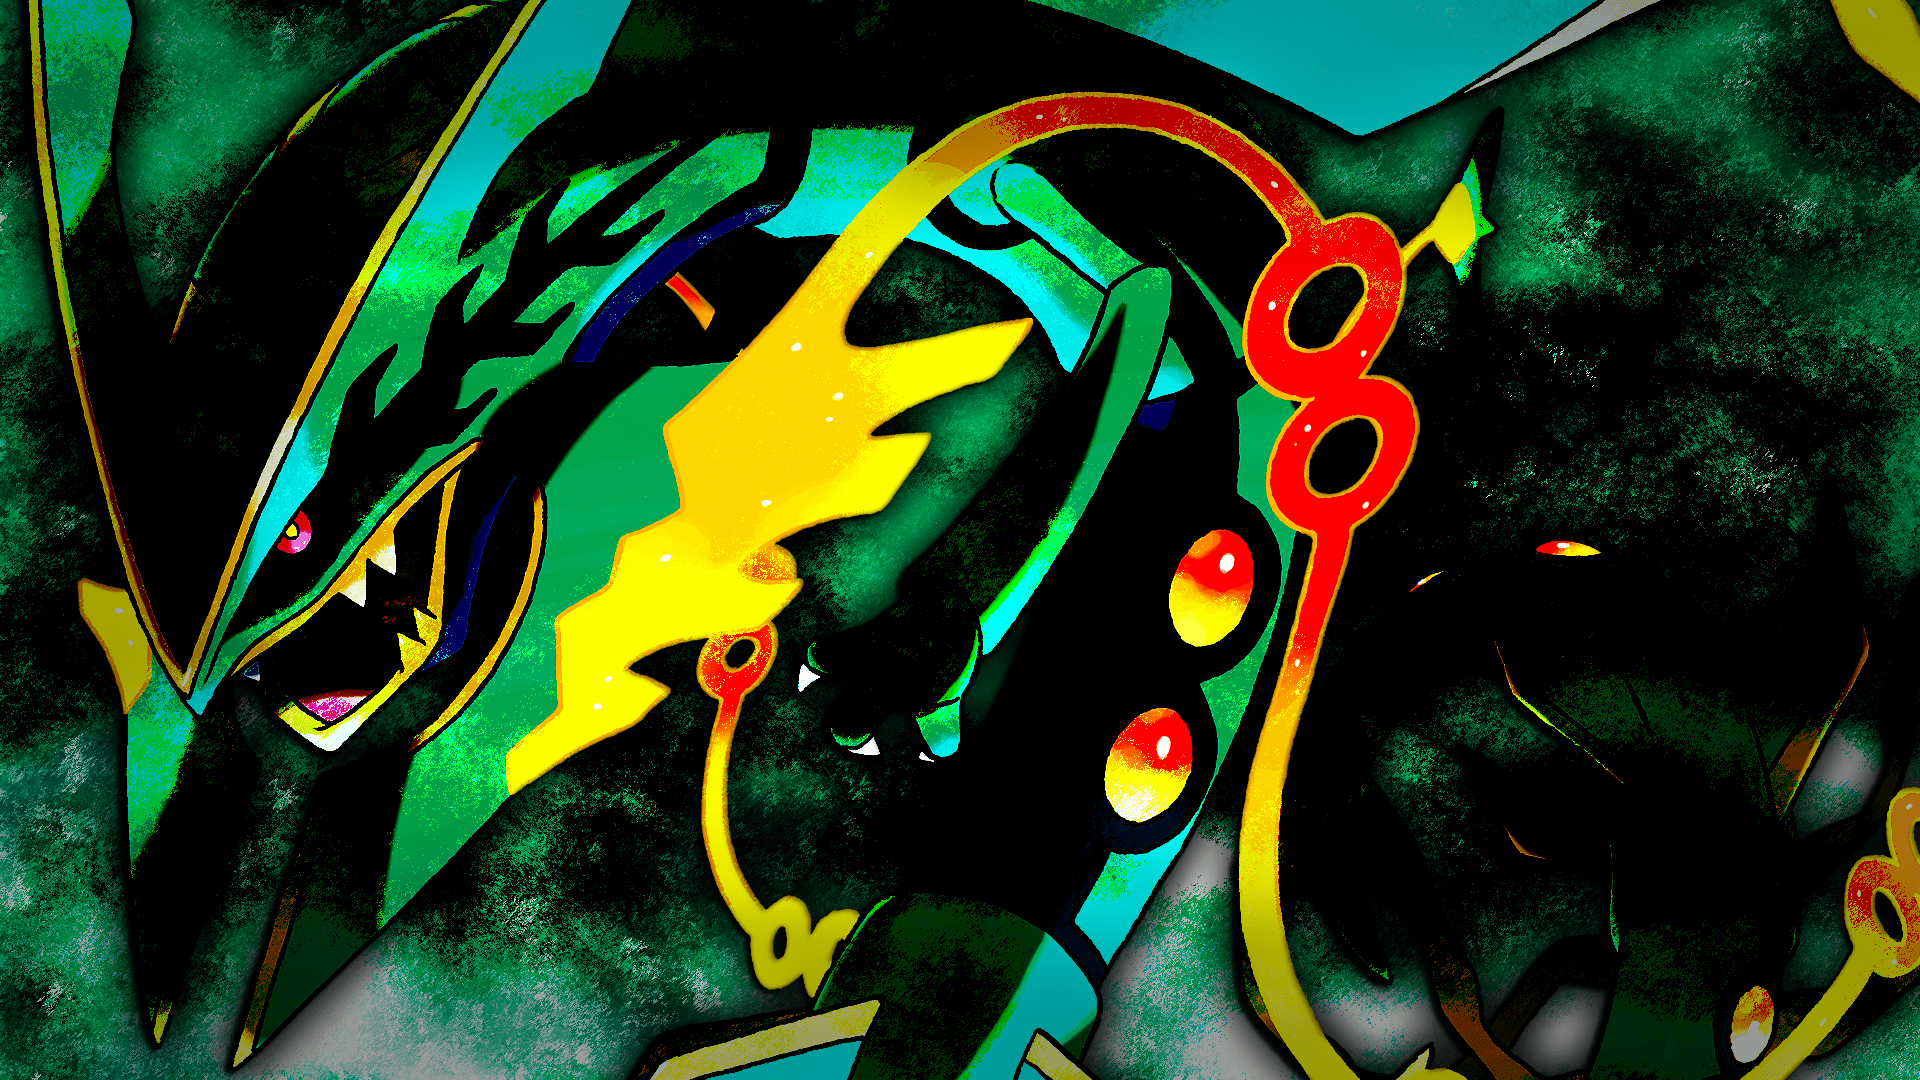 Download Rayquaza (Pokémon) wallpapers for mobile phone, free Rayquaza  (Pokémon) HD pictures